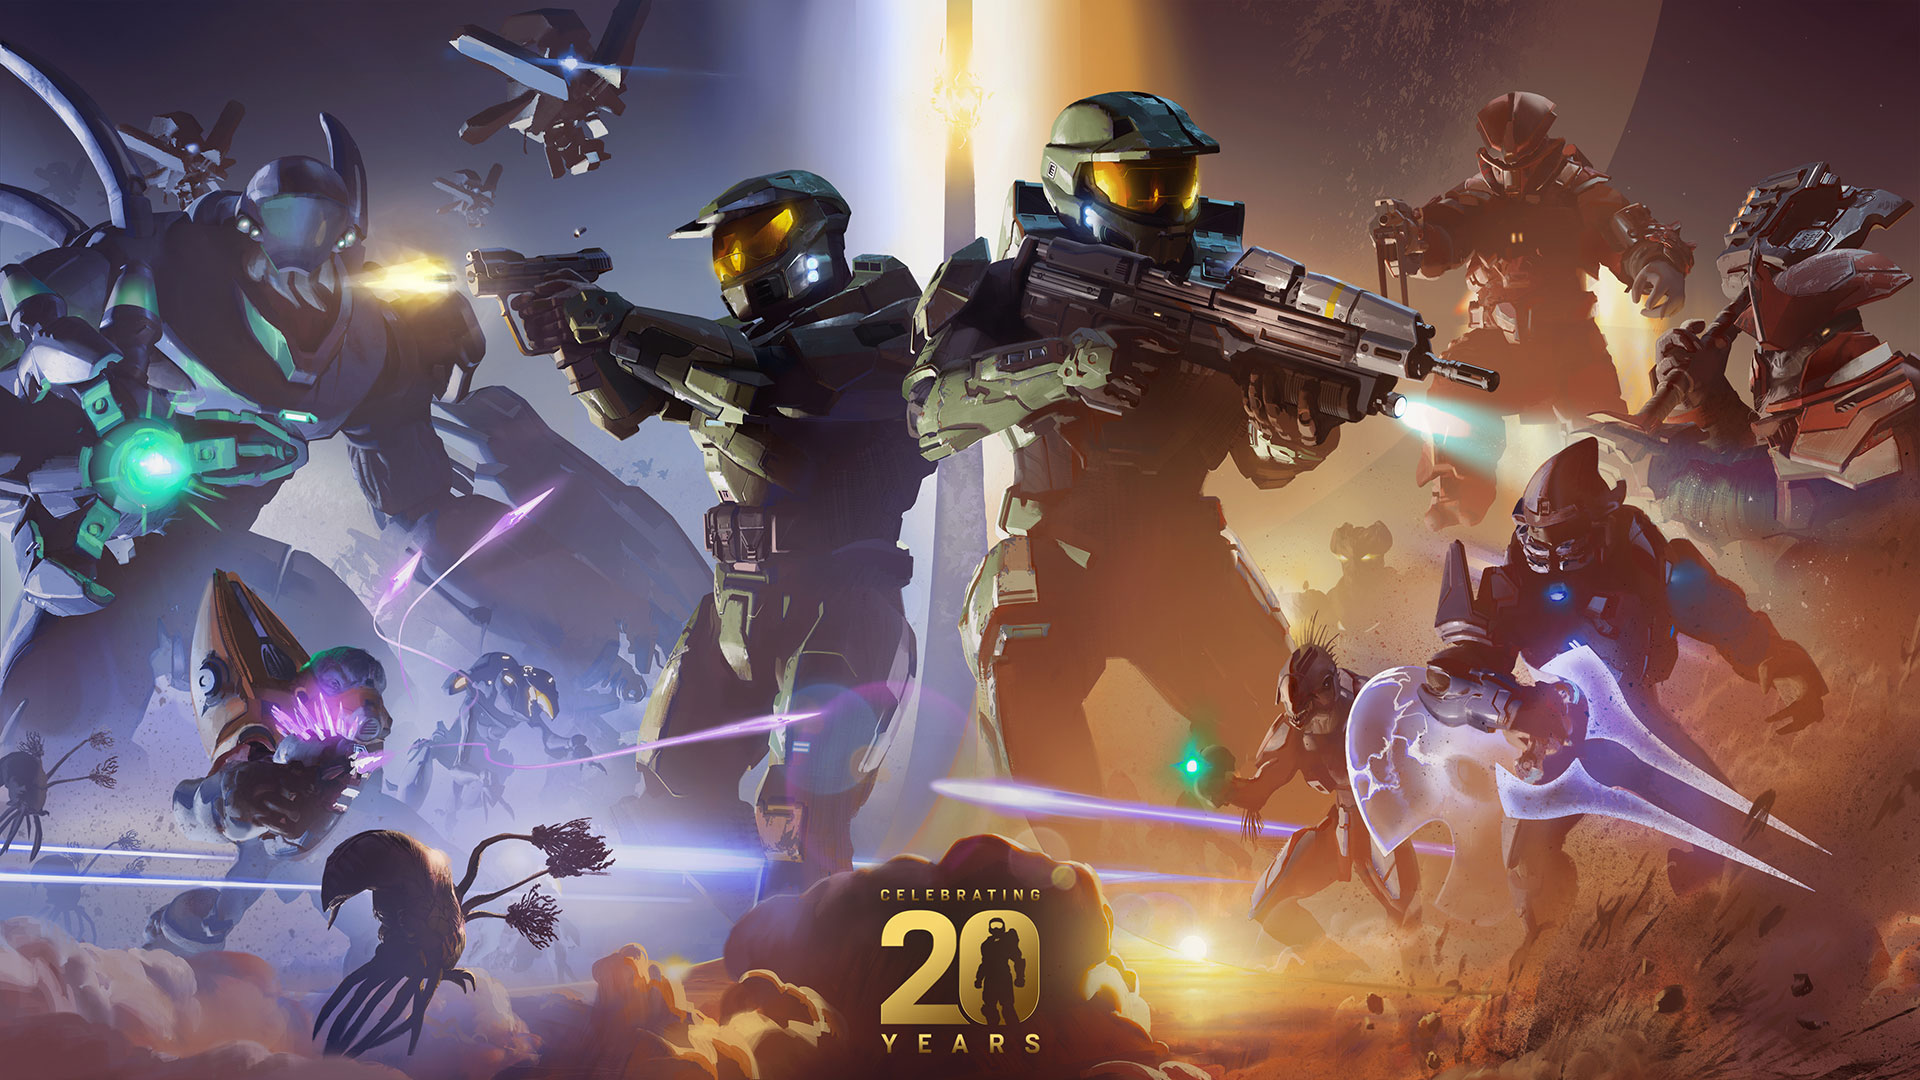 Celebrating 20 Years of Halo | Halo - Official Site (en)